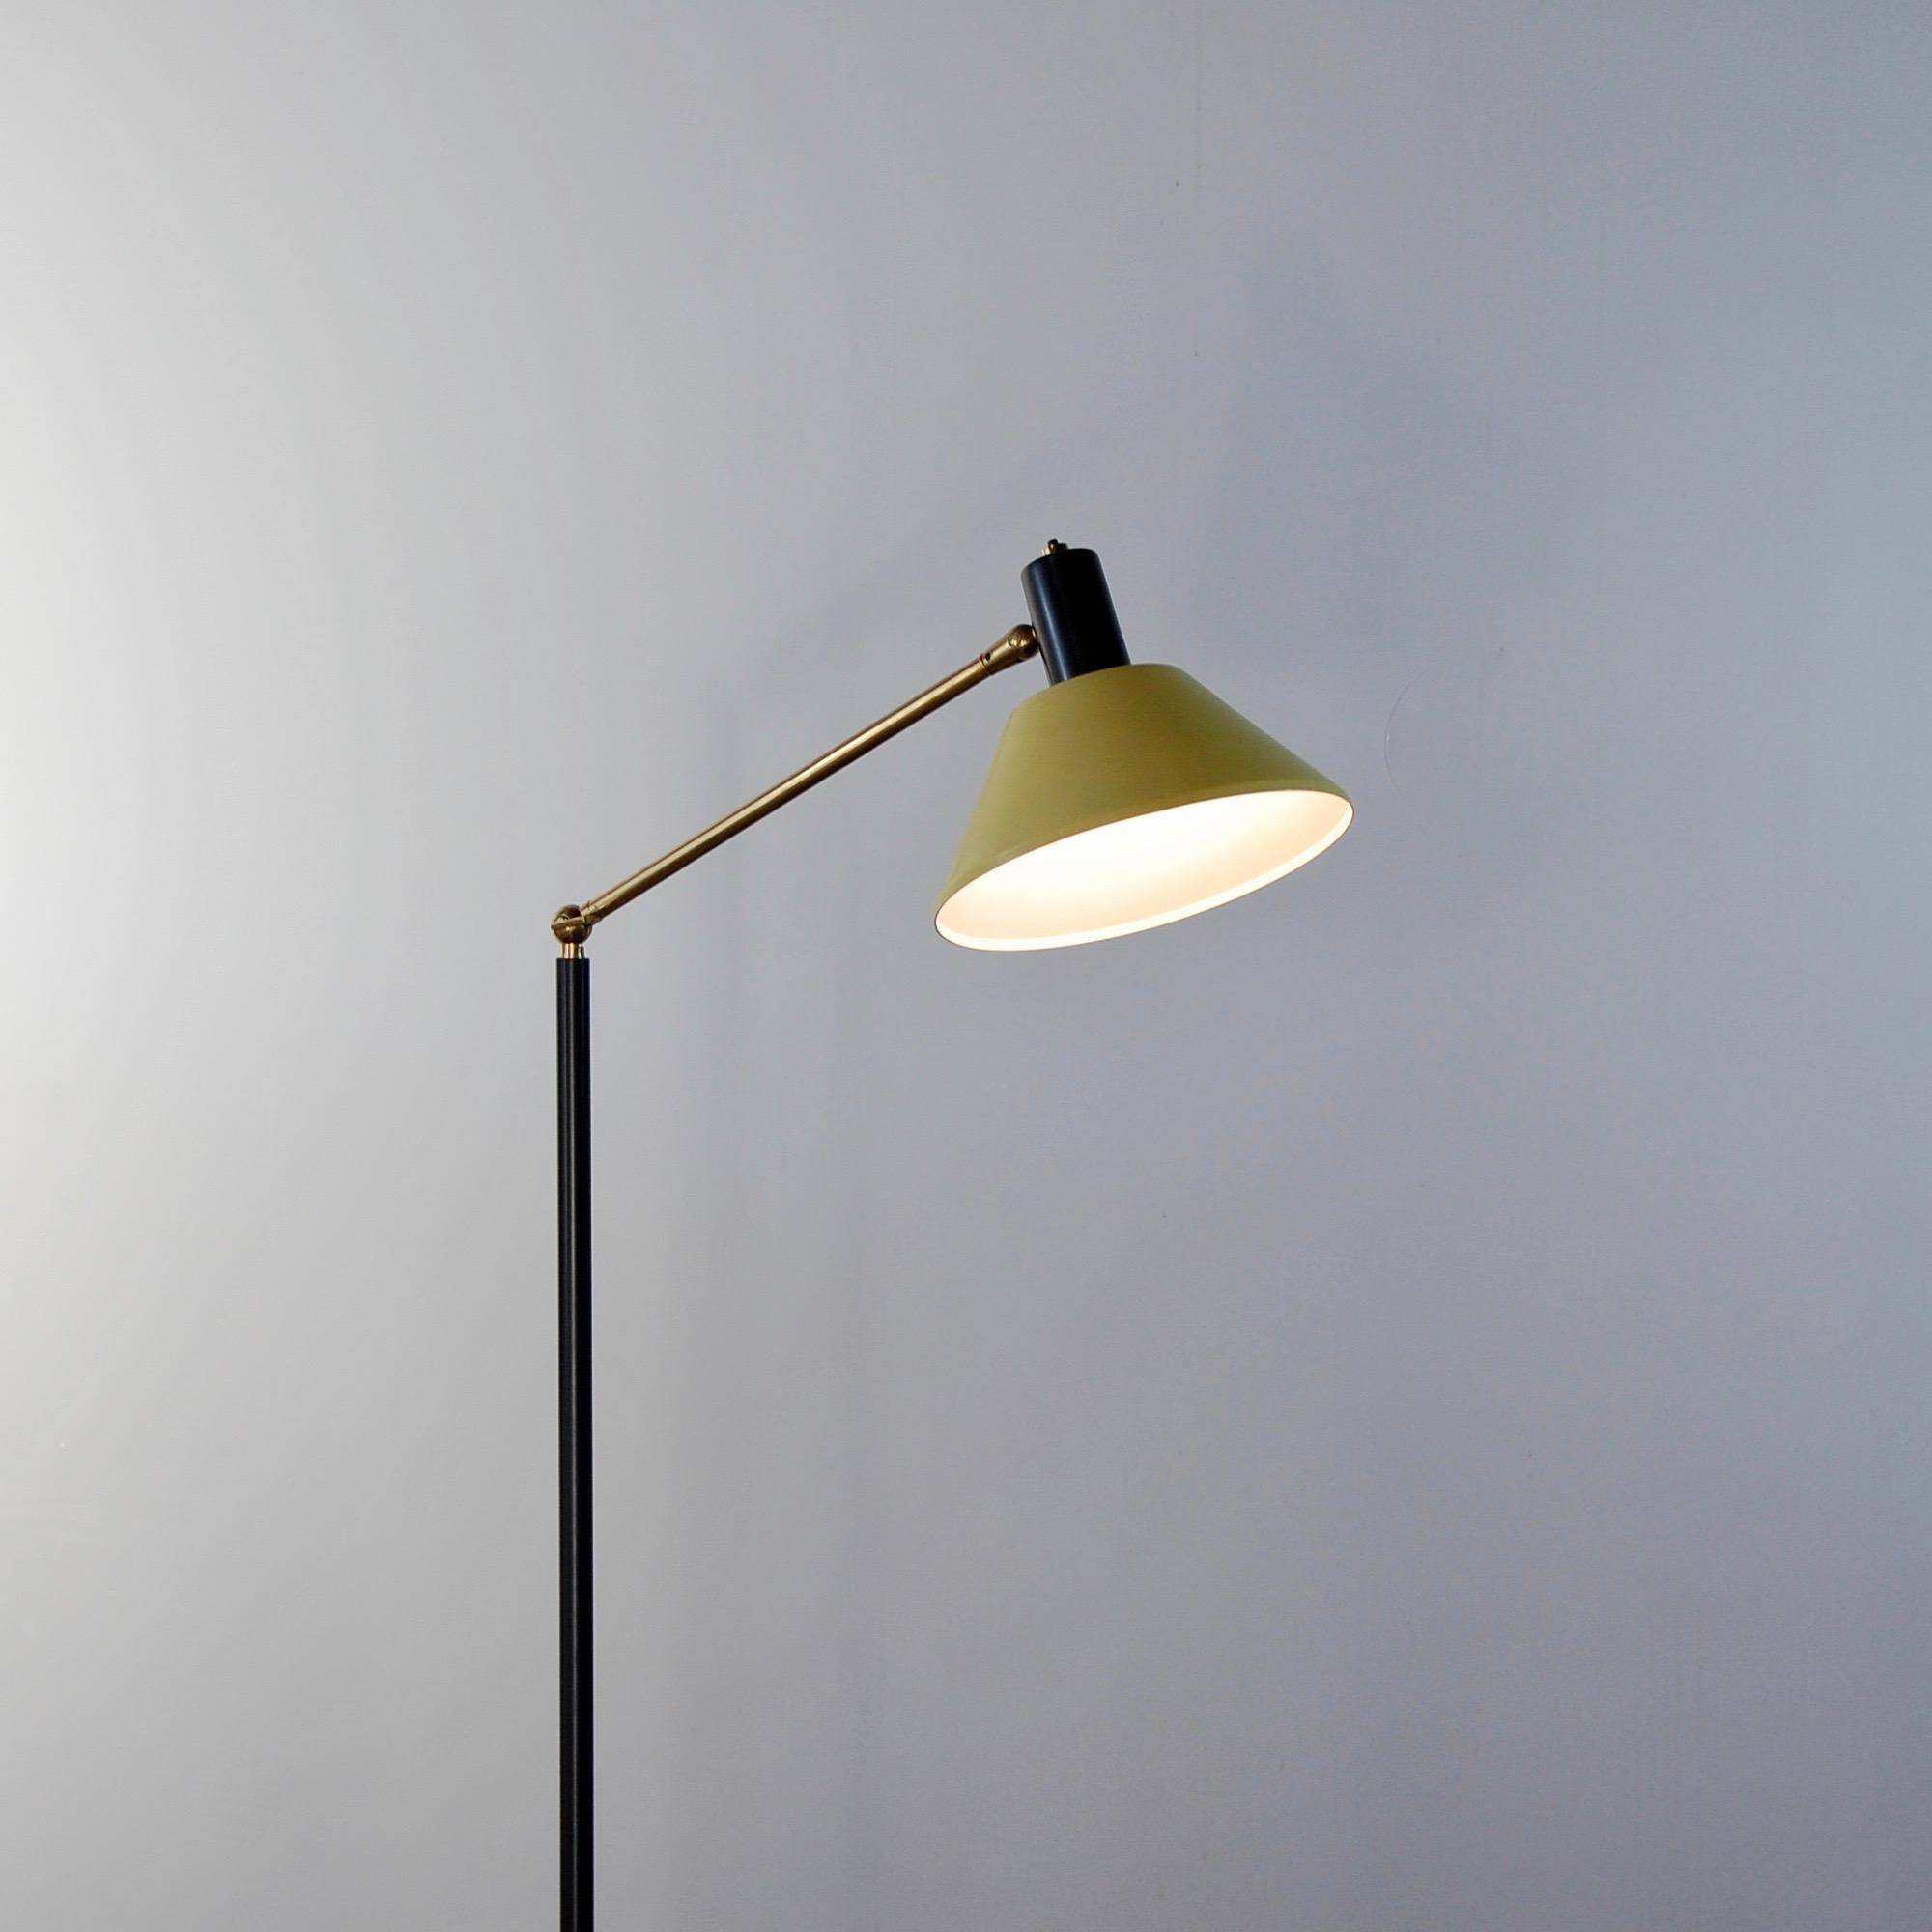 1950s Italian floor lamp by Stilux. Yellow painted aluminum shade and black painted steel. Brass elbow and marble base. Rewired with single E26 medium based socket. Currently wired for use in the US. Light bulb included in order.